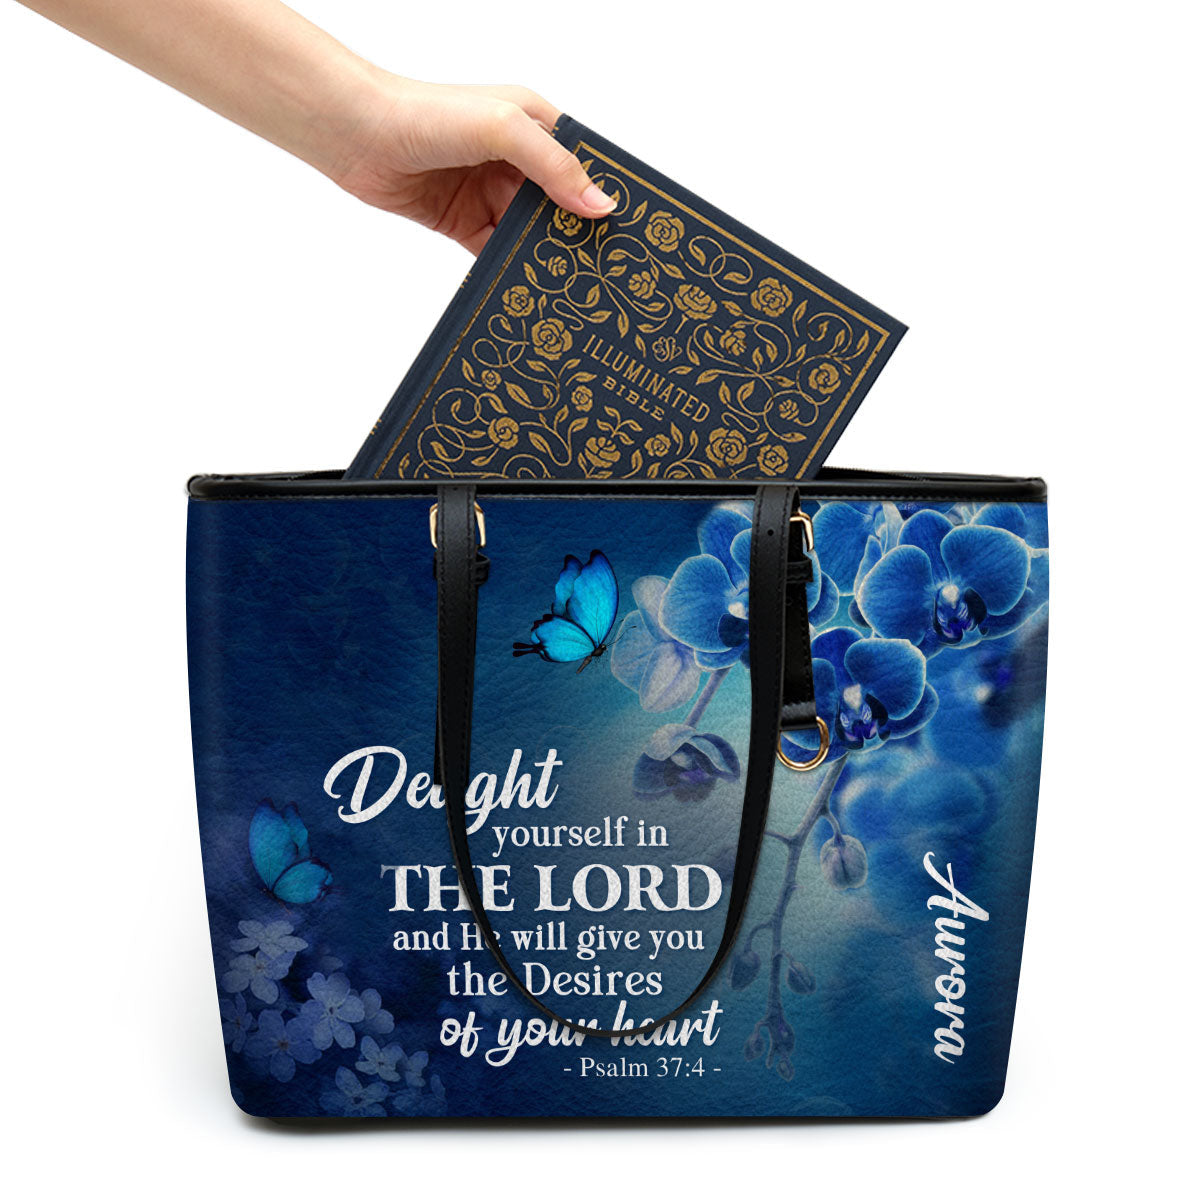 Delight Yourself In The Lord Psalm 374 Blue Orchids And Lilac Personalized Large Leather Tote Bag - Christian Gifts For Women